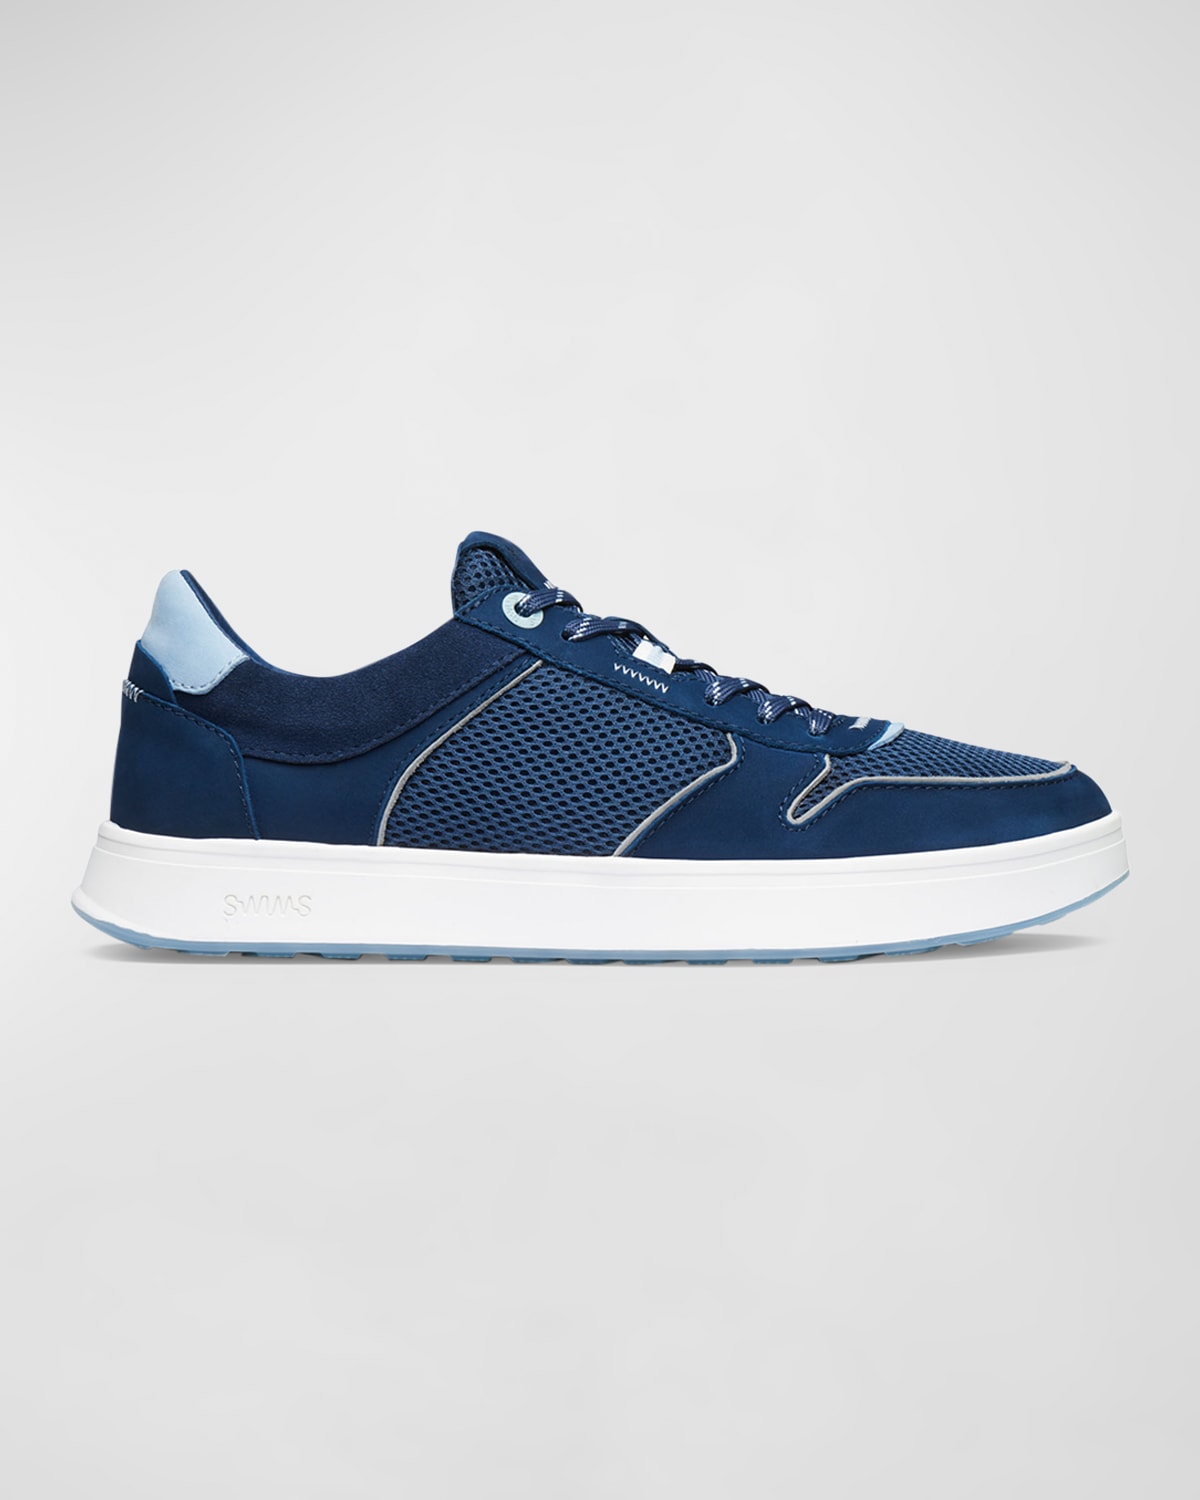 Men's Strada Mix-Leather and Mesh Sneakers